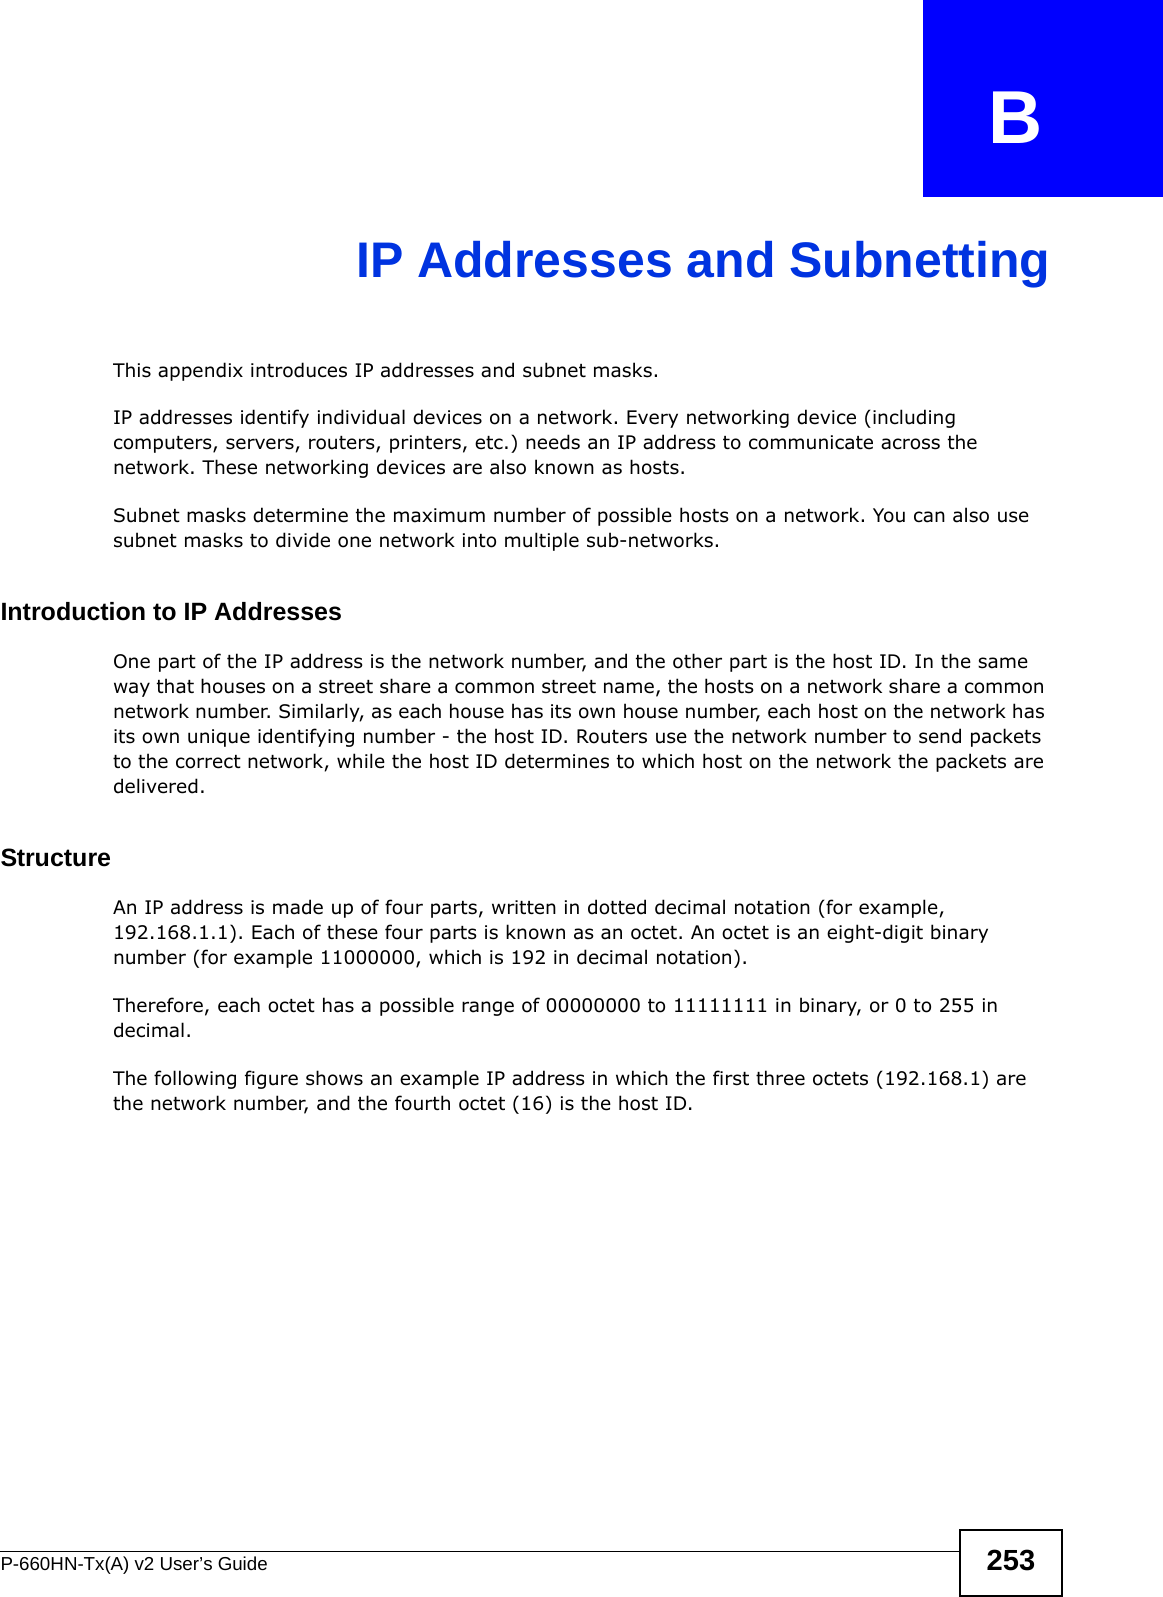 P-660HN-Tx(A) v2 User’s Guide 253APPENDIX   BIP Addresses and SubnettingThis appendix introduces IP addresses and subnet masks. IP addresses identify individual devices on a network. Every networking device (including computers, servers, routers, printers, etc.) needs an IP address to communicate across the network. These networking devices are also known as hosts.Subnet masks determine the maximum number of possible hosts on a network. You can also use subnet masks to divide one network into multiple sub-networks.Introduction to IP AddressesOne part of the IP address is the network number, and the other part is the host ID. In the same way that houses on a street share a common street name, the hosts on a network share a common network number. Similarly, as each house has its own house number, each host on the network has its own unique identifying number - the host ID. Routers use the network number to send packets to the correct network, while the host ID determines to which host on the network the packets are delivered.StructureAn IP address is made up of four parts, written in dotted decimal notation (for example, 192.168.1.1). Each of these four parts is known as an octet. An octet is an eight-digit binary number (for example 11000000, which is 192 in decimal notation). Therefore, each octet has a possible range of 00000000 to 11111111 in binary, or 0 to 255 in decimal.The following figure shows an example IP address in which the first three octets (192.168.1) are the network number, and the fourth octet (16) is the host ID.